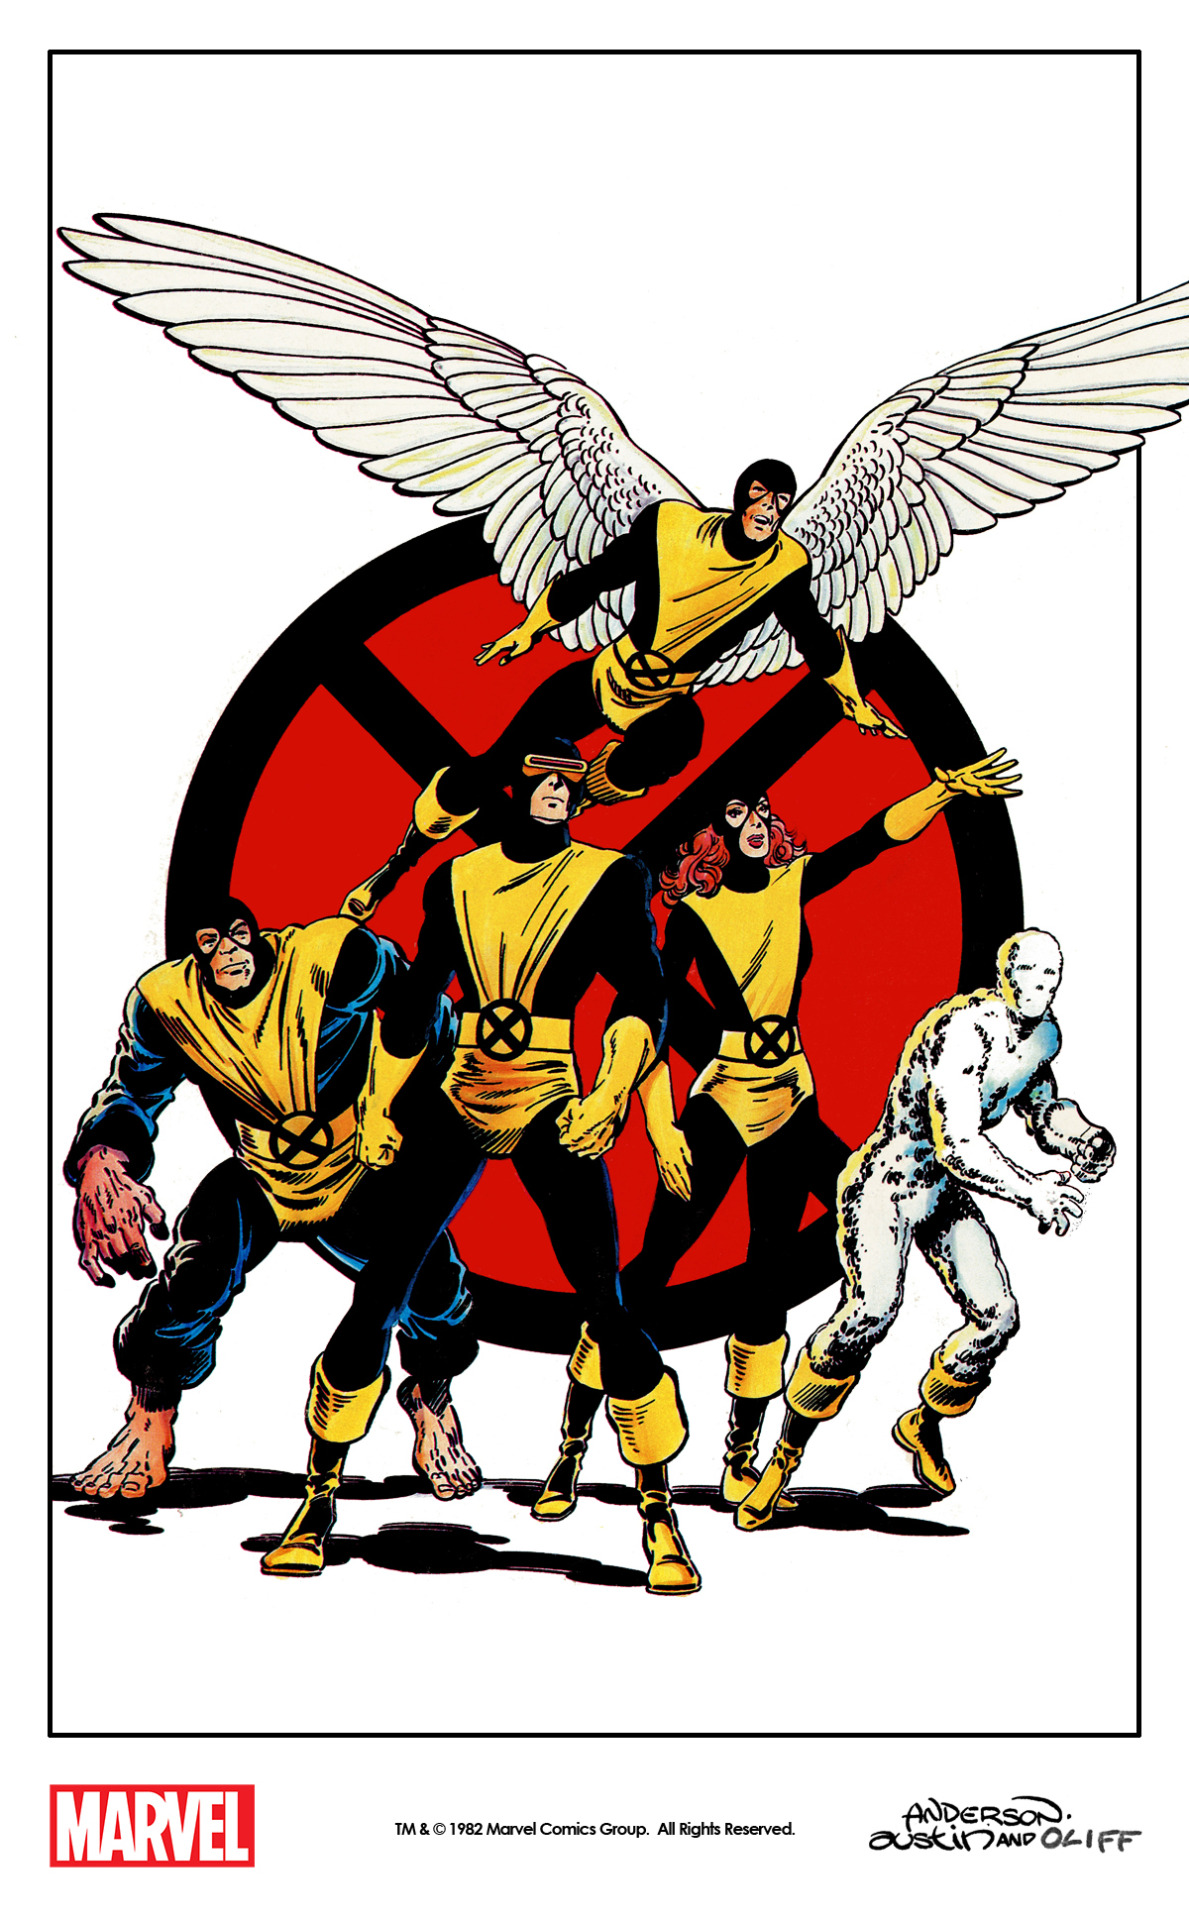 themarvelproject:
“ The original X-Men by Brent Anderson with inks by Terry Austin and colors by Steve Oliff from the back cover of Marvel Comics Index 9A (1982) remastered by The Marvel Project.
”